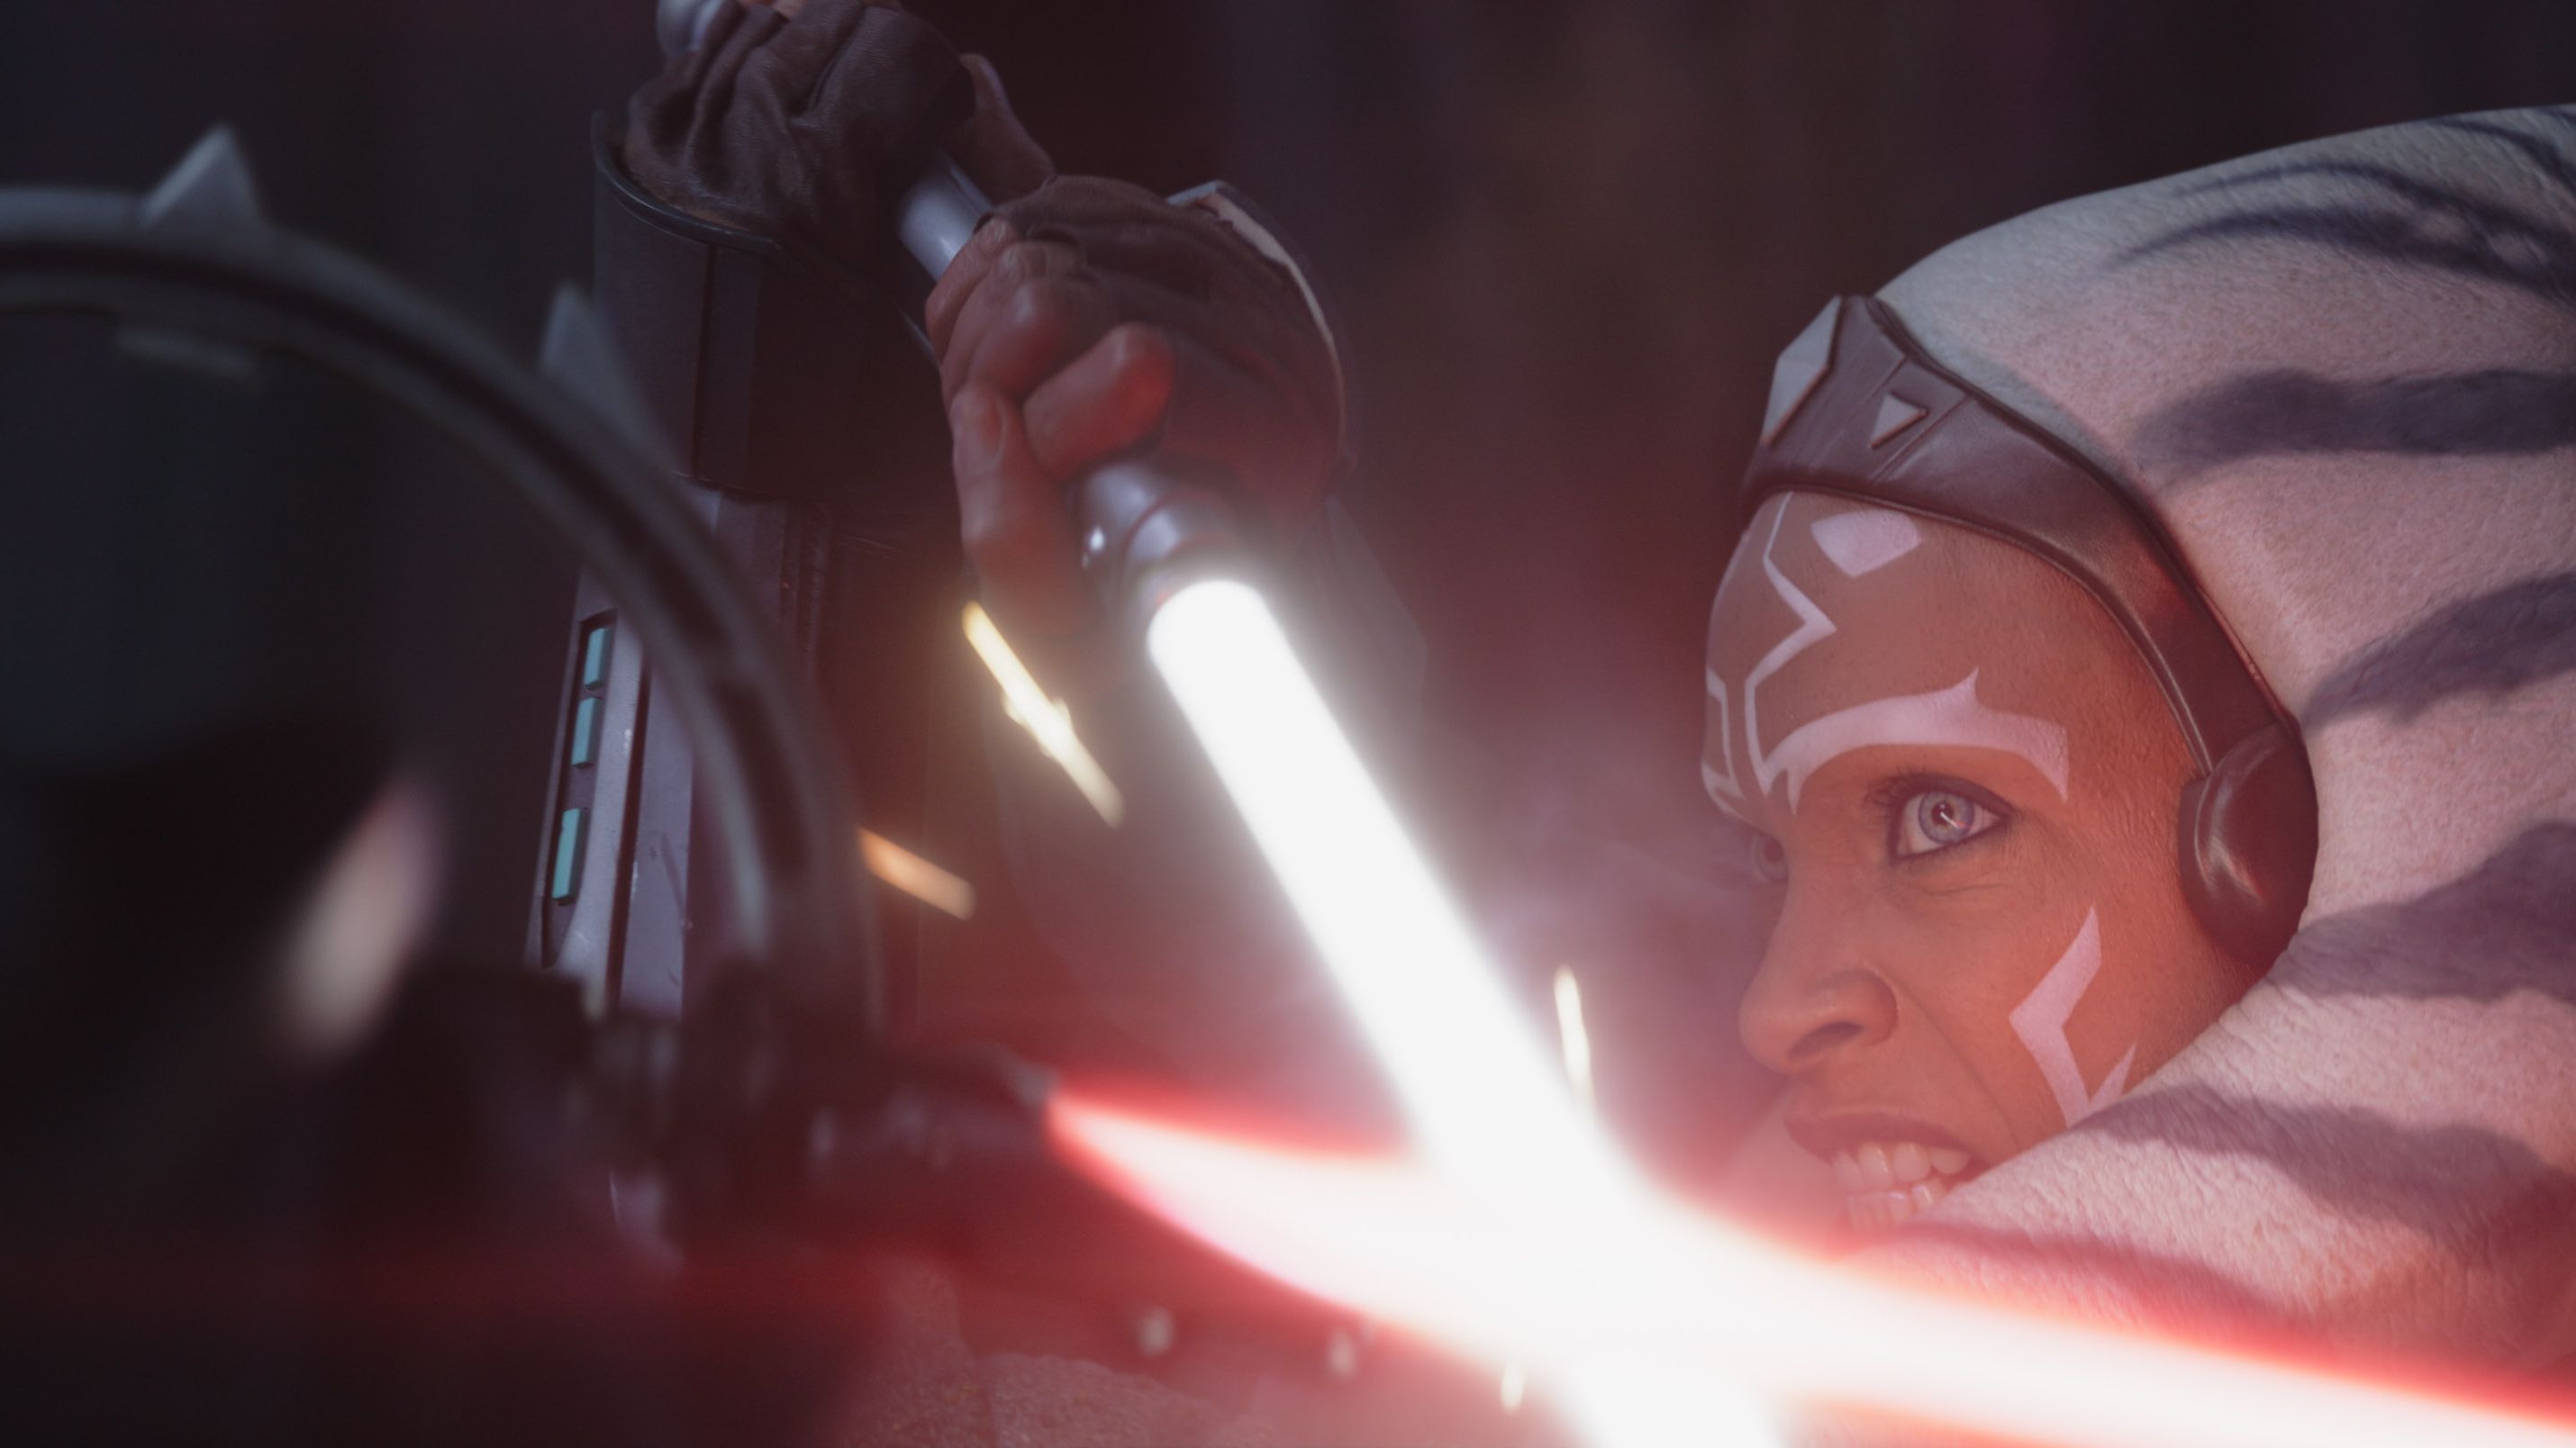 Rise of Skywalker' after credits spoilers: Anakin, Ahsoka, and every voice